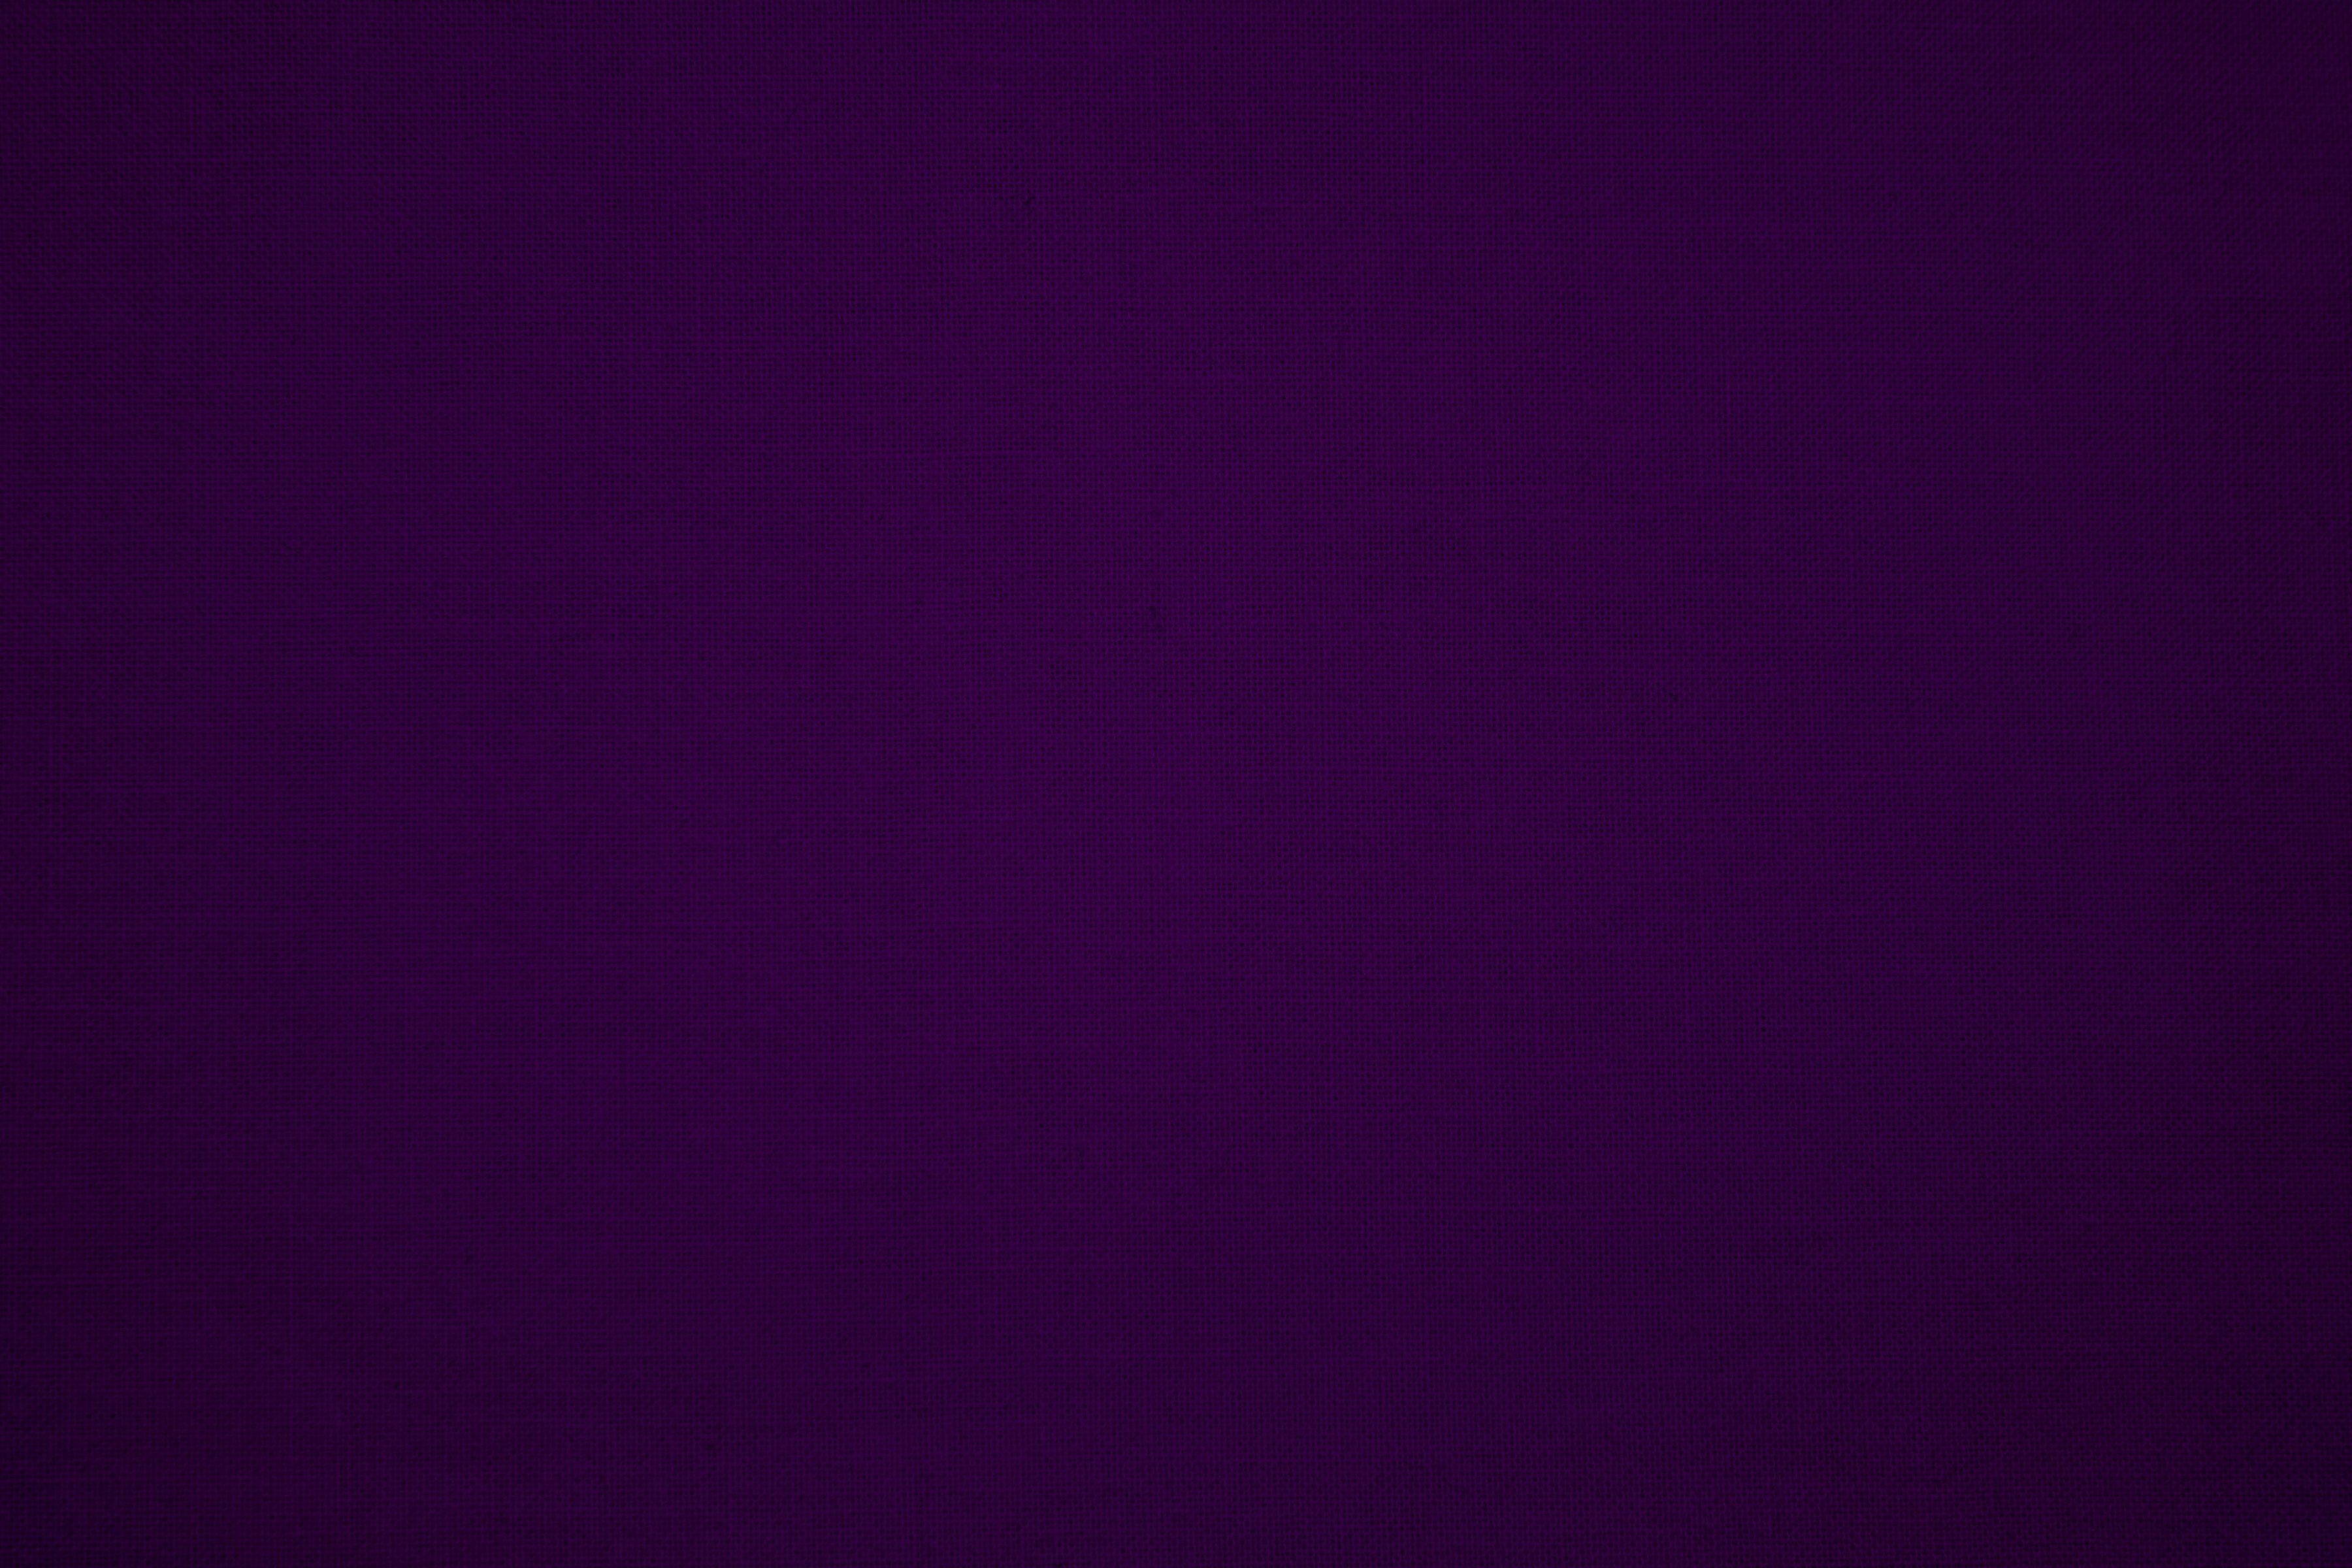 Wallpapers For Plain Dark Purple Backgrounds 3600x2400